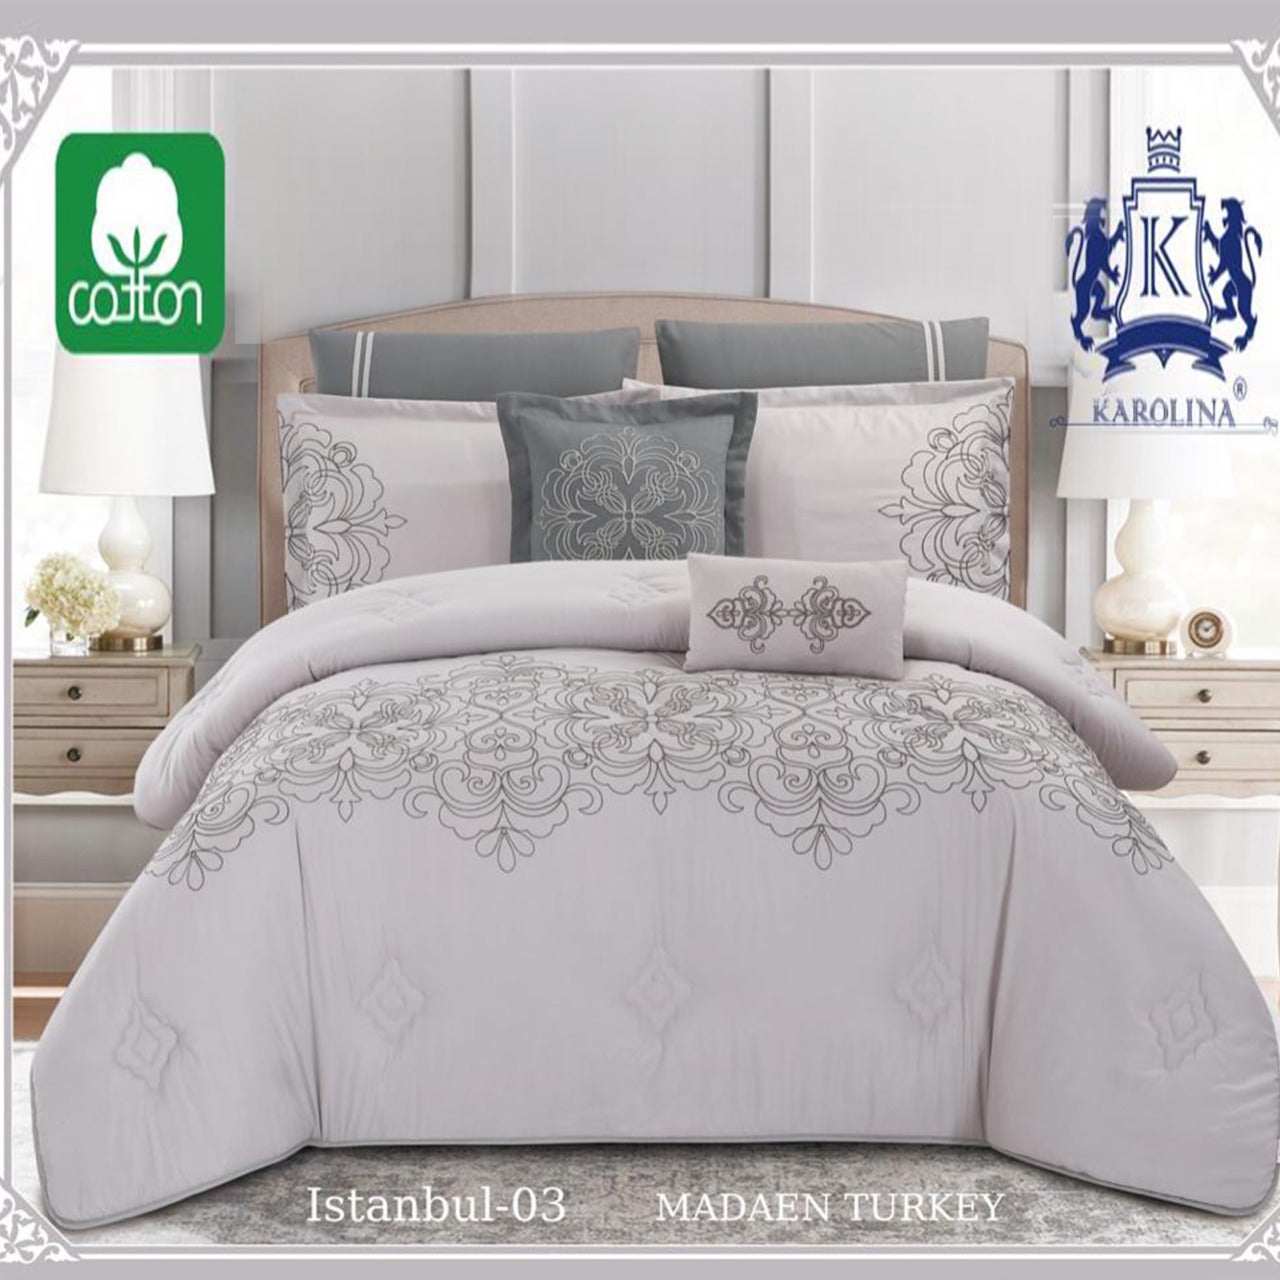 10 Piece Comforter Bedding With Sheet and Decorative Pillow Shams | Made in Turkey Istanbul - 03 Zaappy